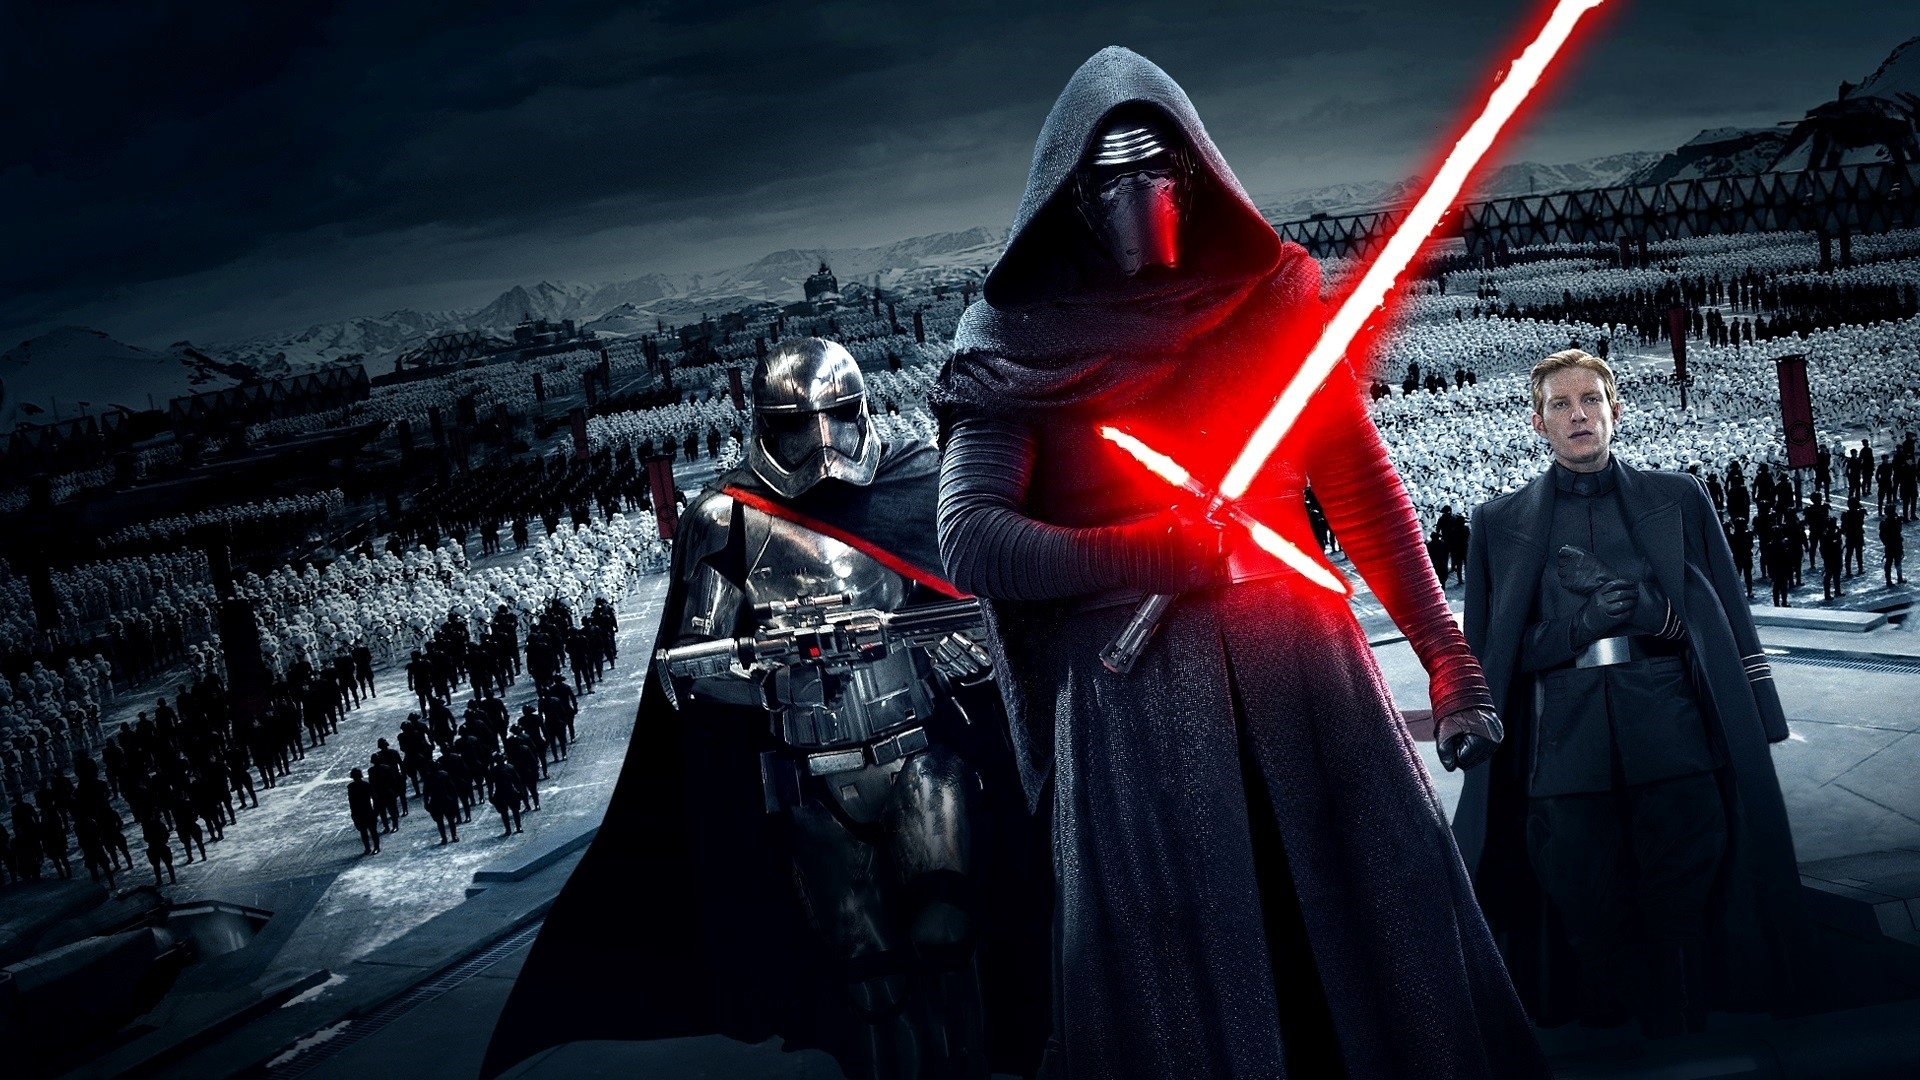 10 Top The First Order Wallpaper FULL HD 1080p For PC Desktop